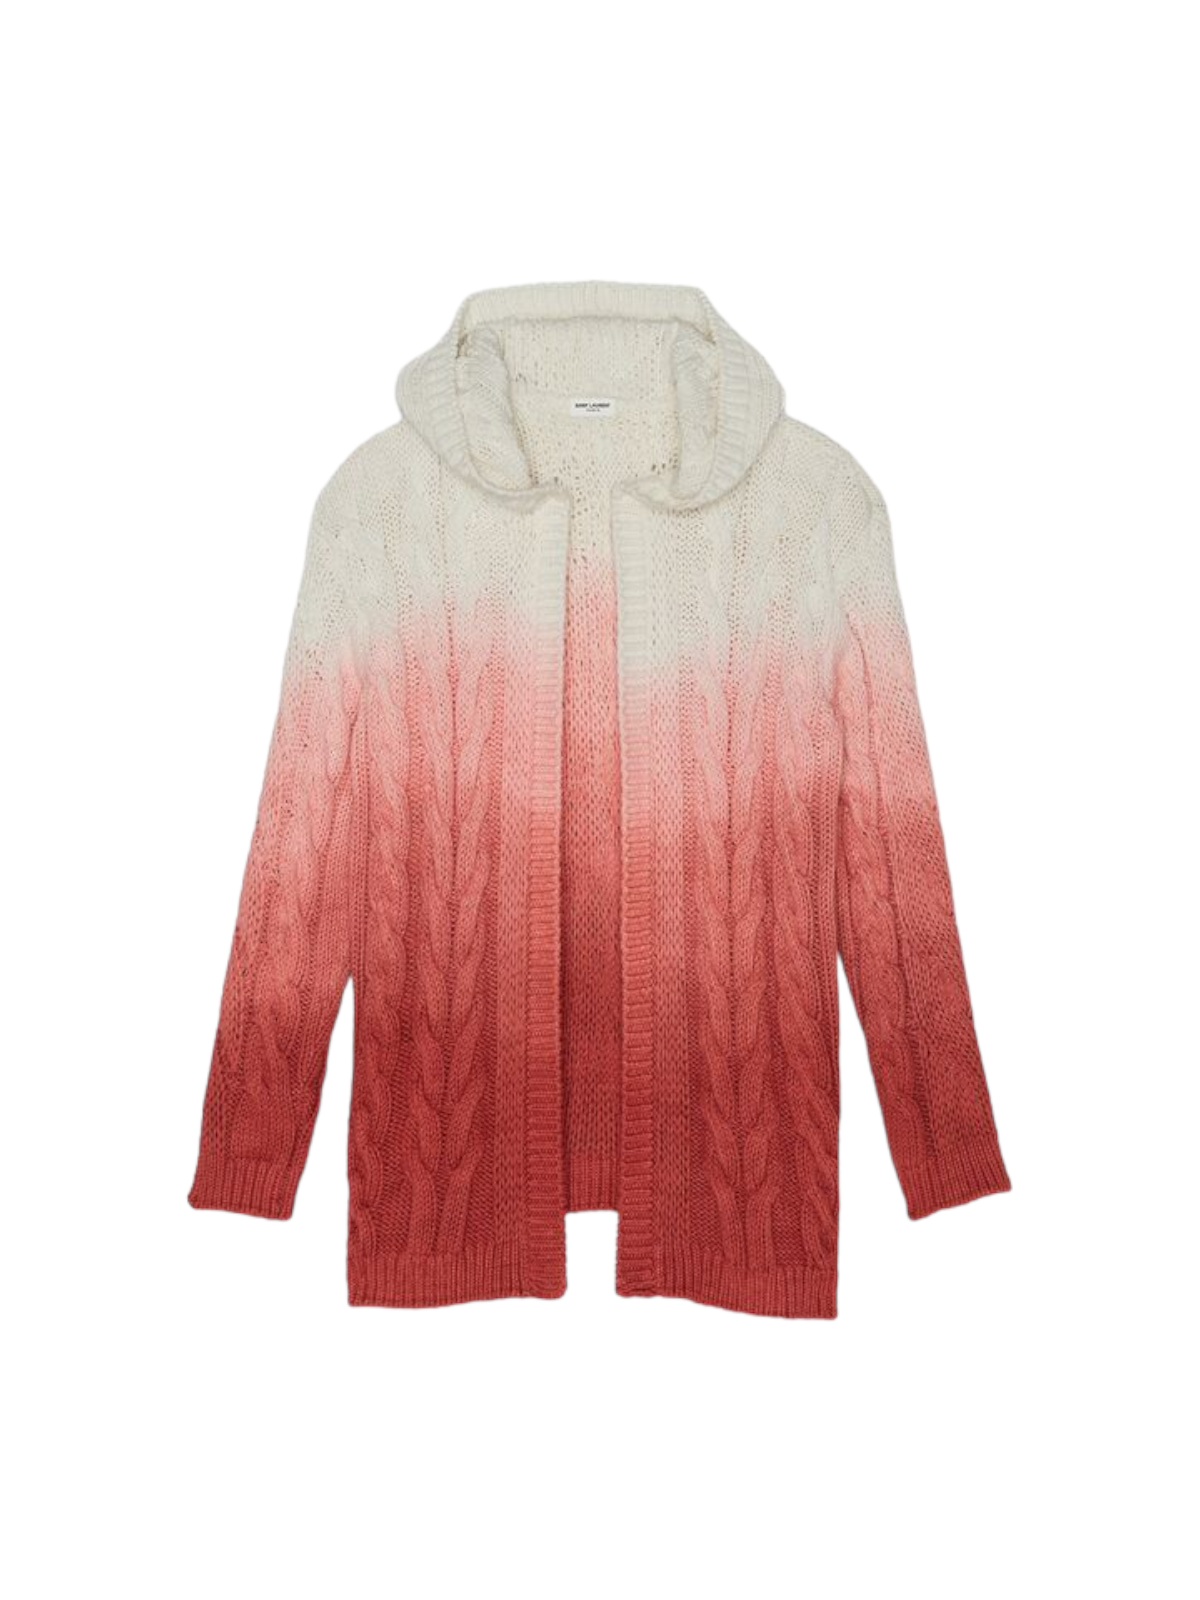 Saint Laurent Baja Hooded Cardigan in Dip-Dyed Cotton Cable Knit